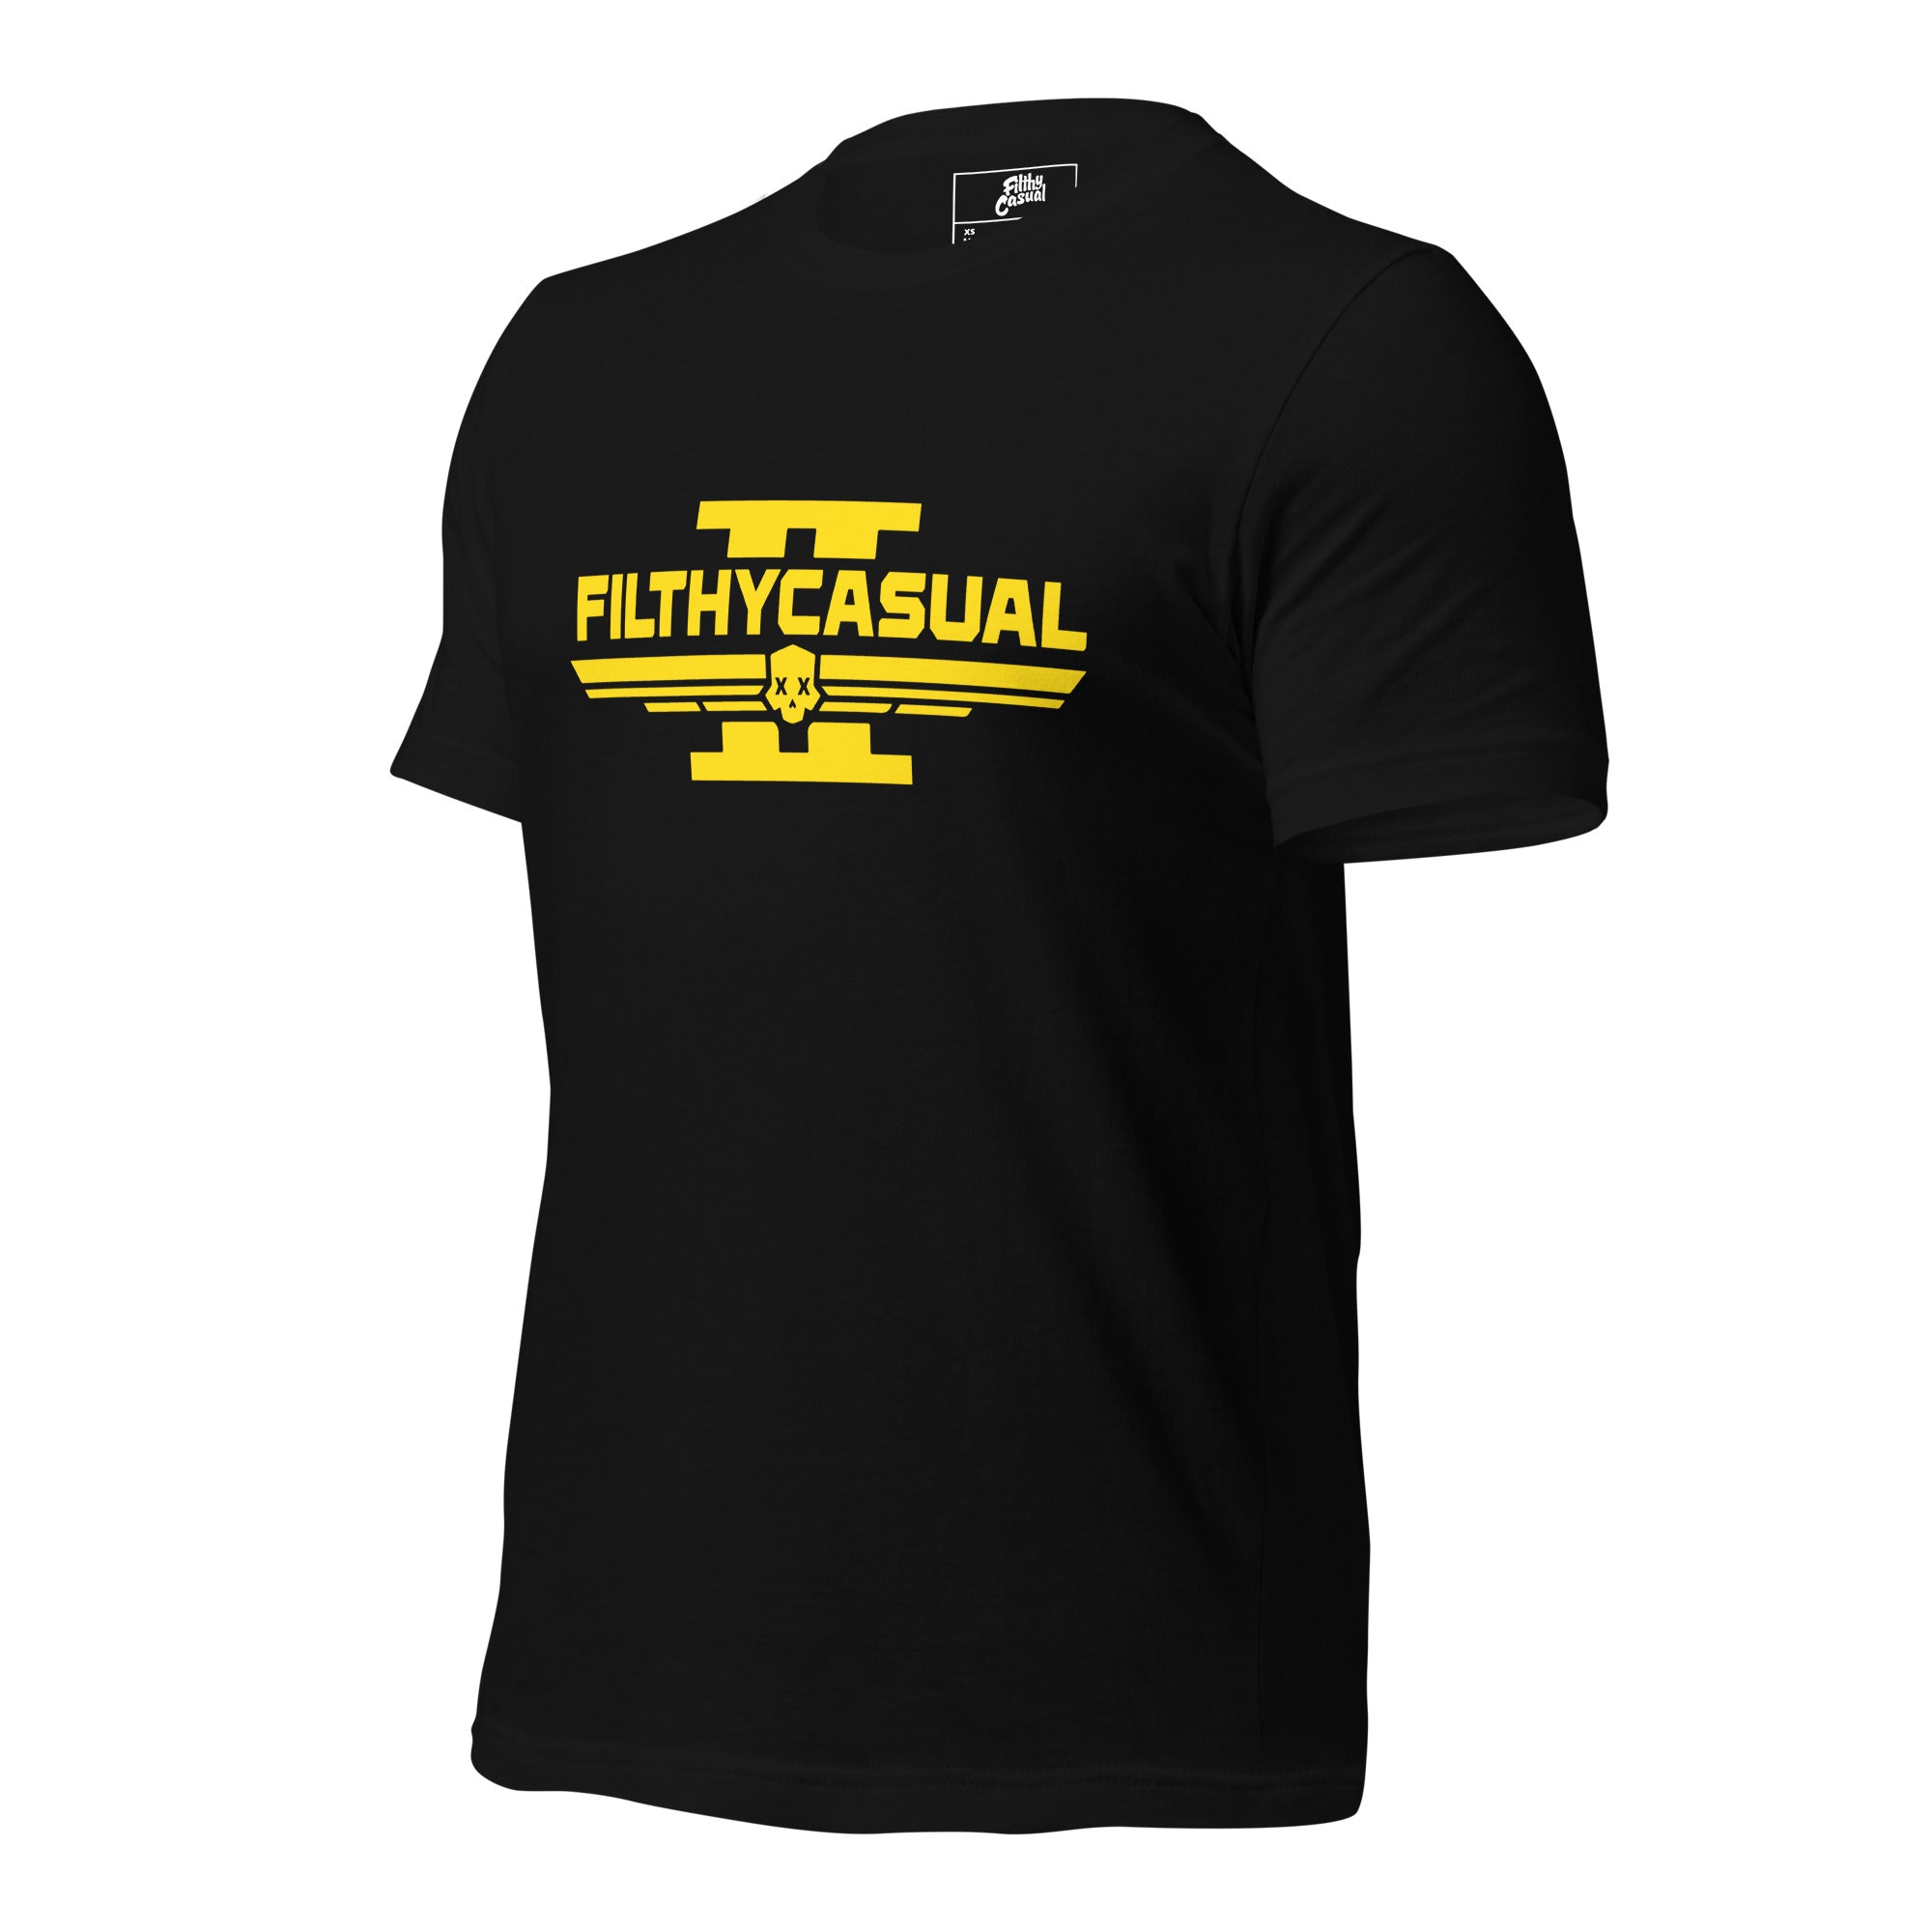 Hellcasuals T-shirt - Filthy Casual Co.